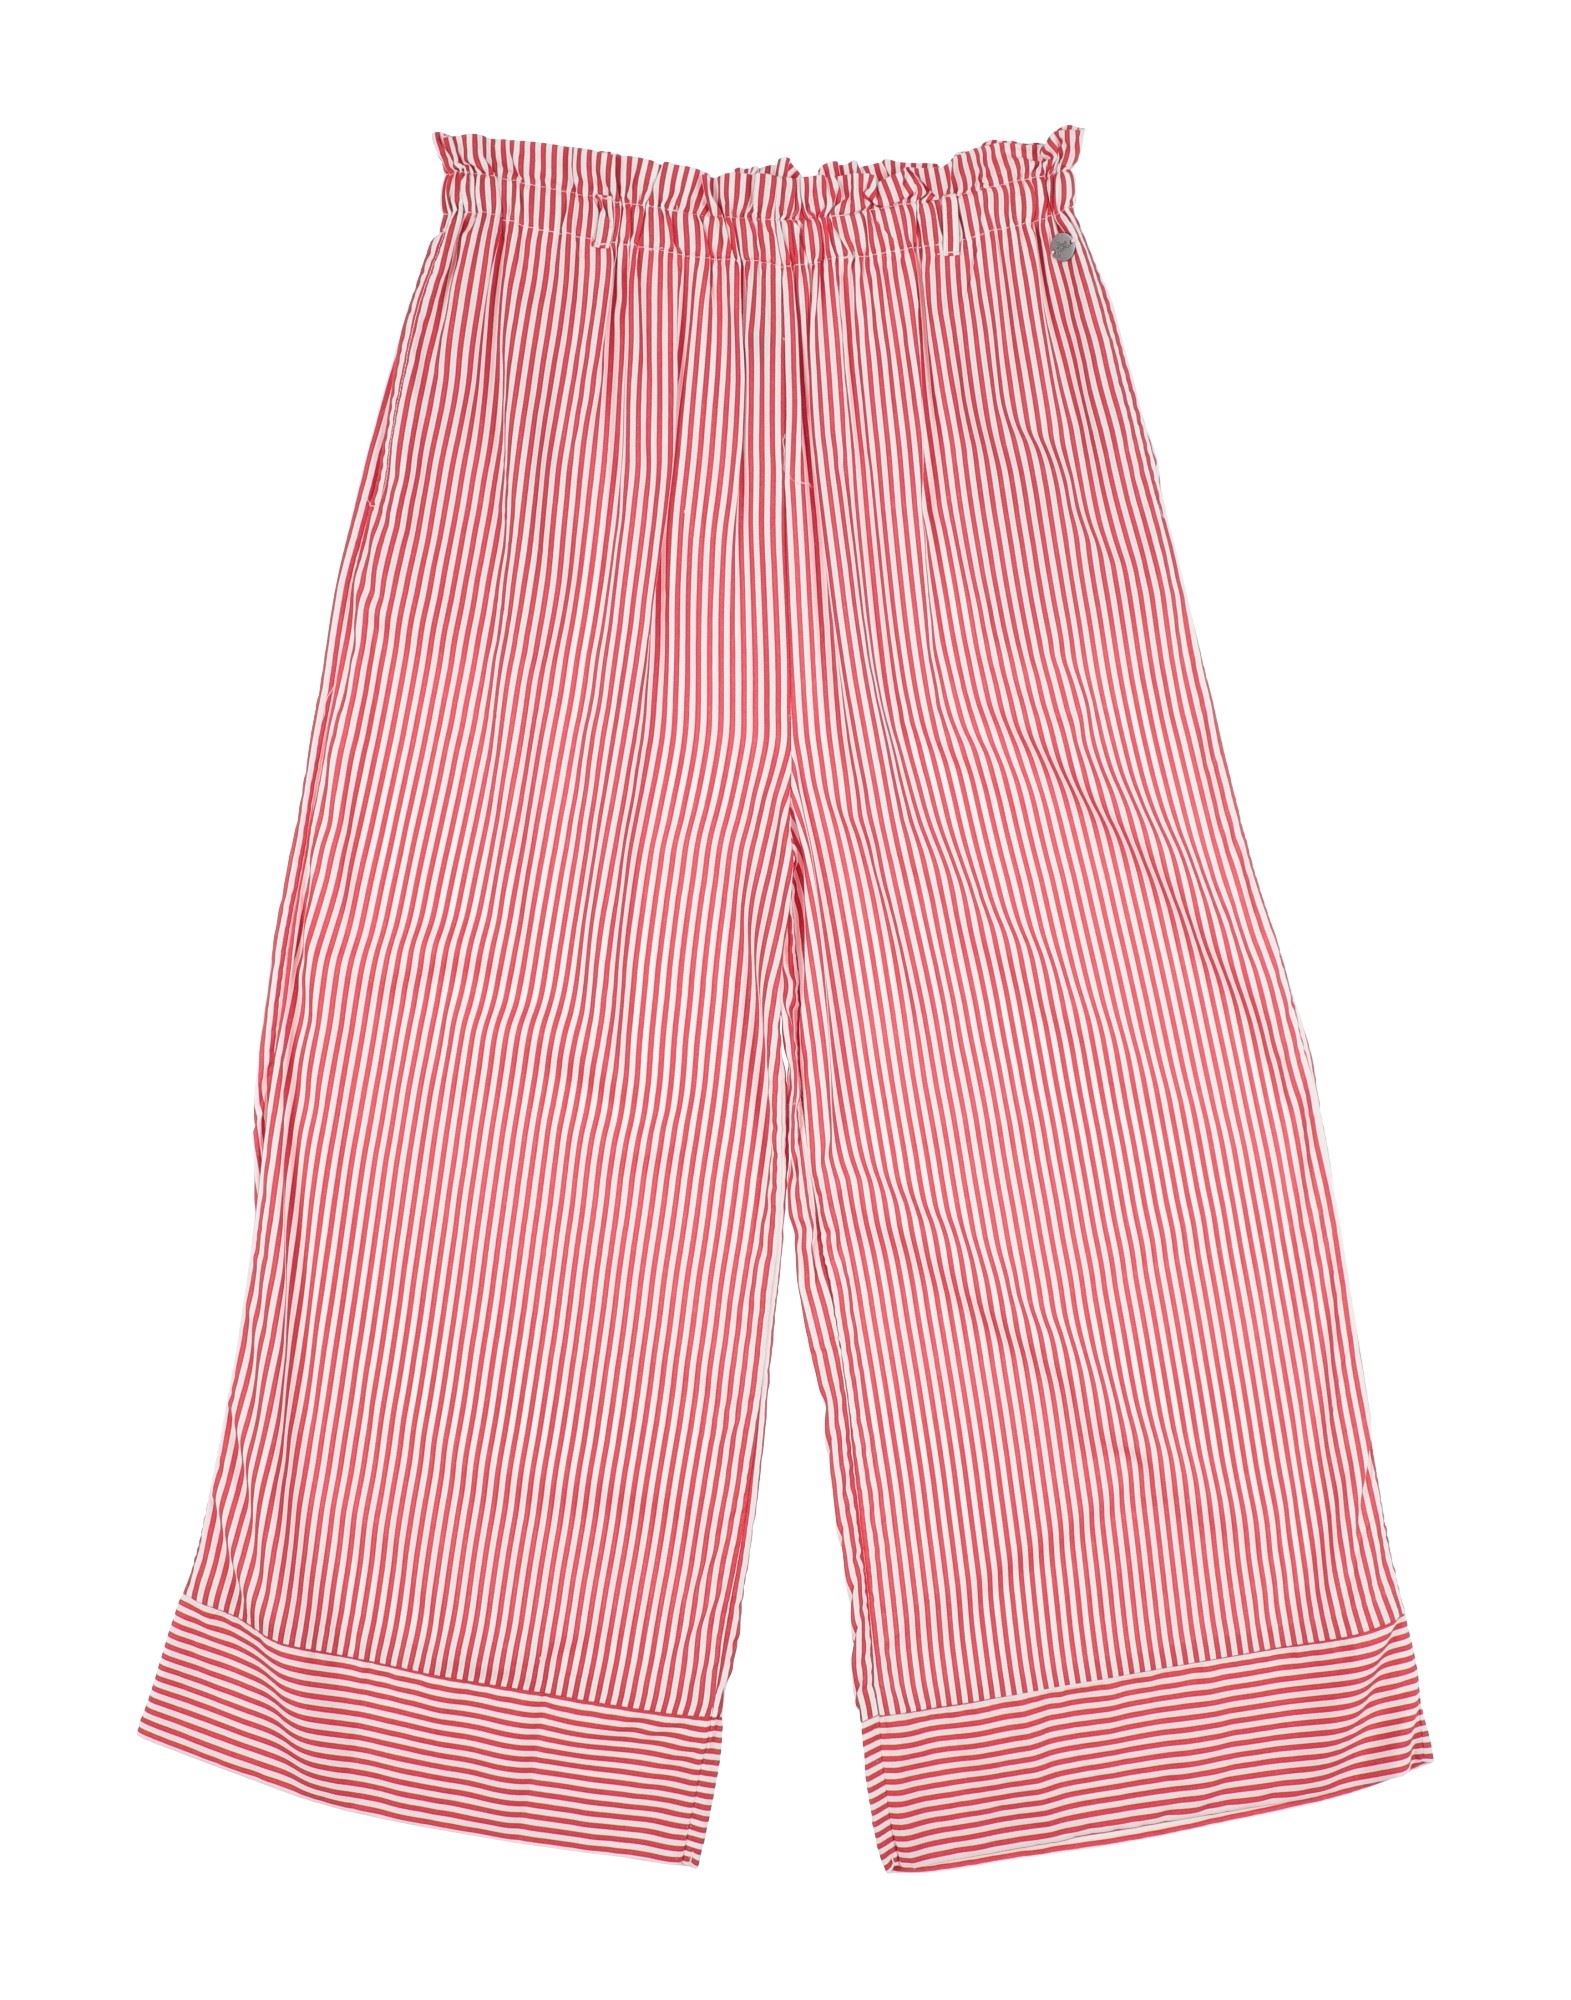 PEPE JEANS Hose Kinder Rot von PEPE JEANS